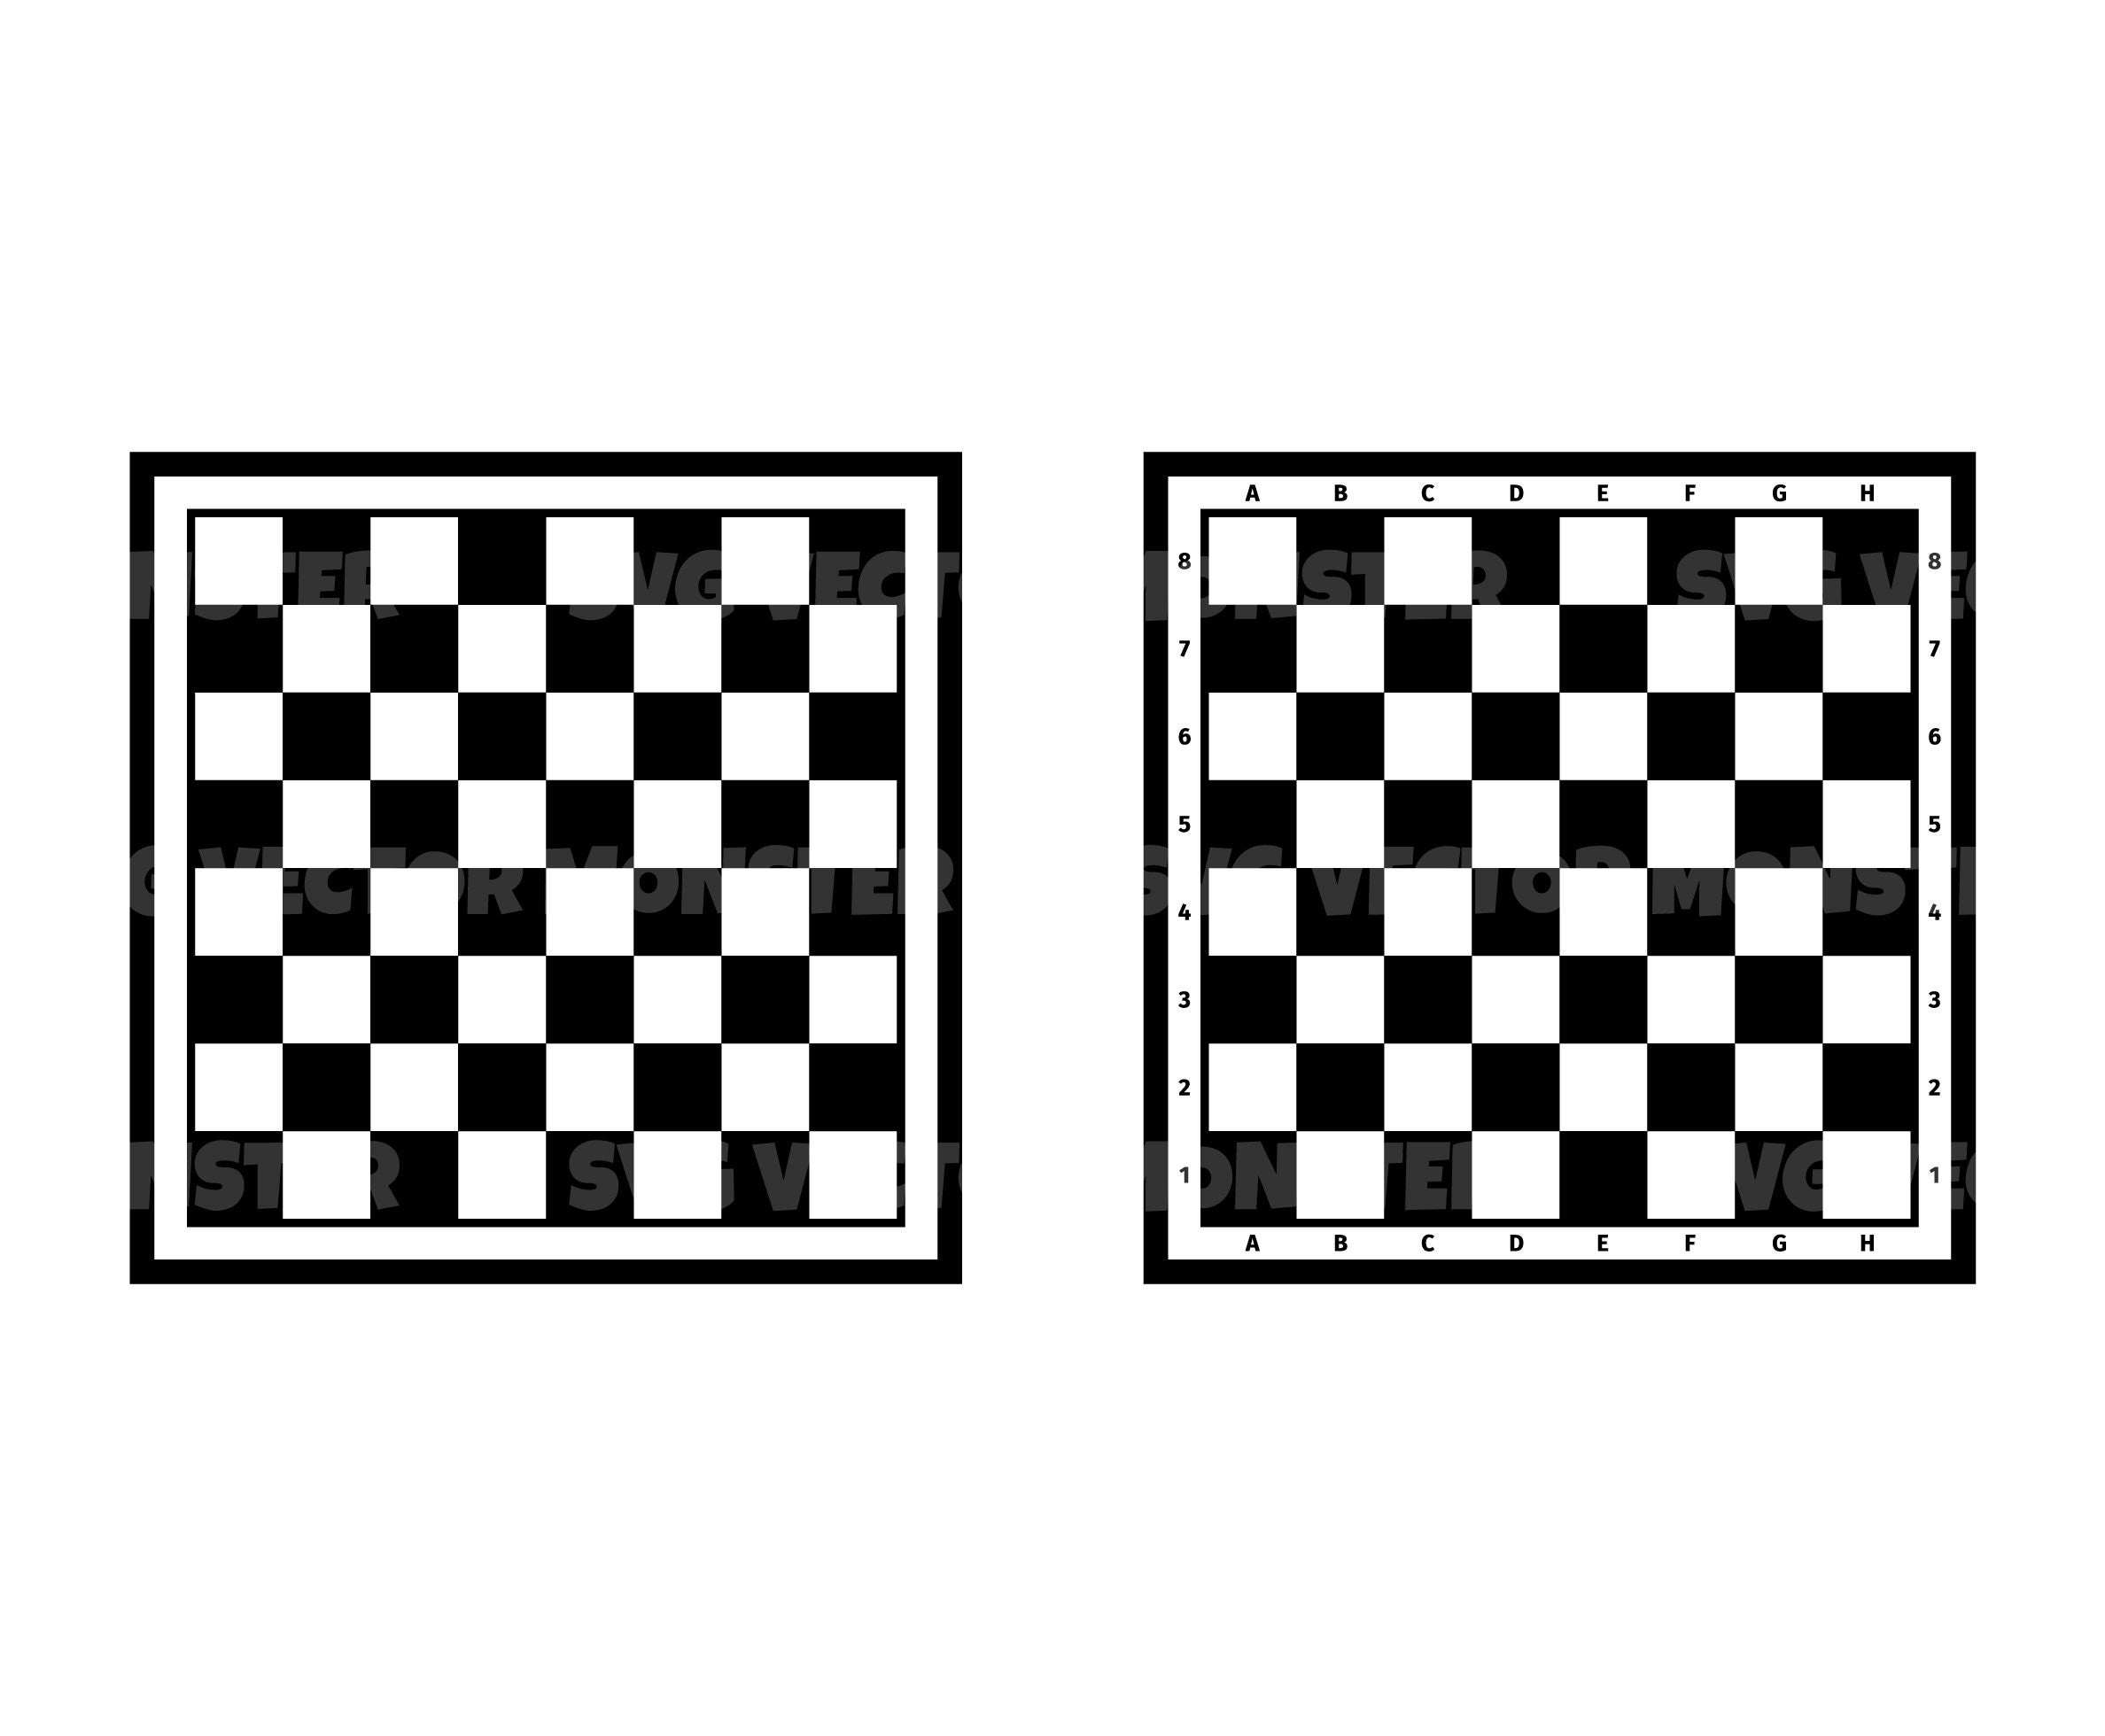 File:Chess-board-with-letters nevit 111.svg - Wikimedia Commons